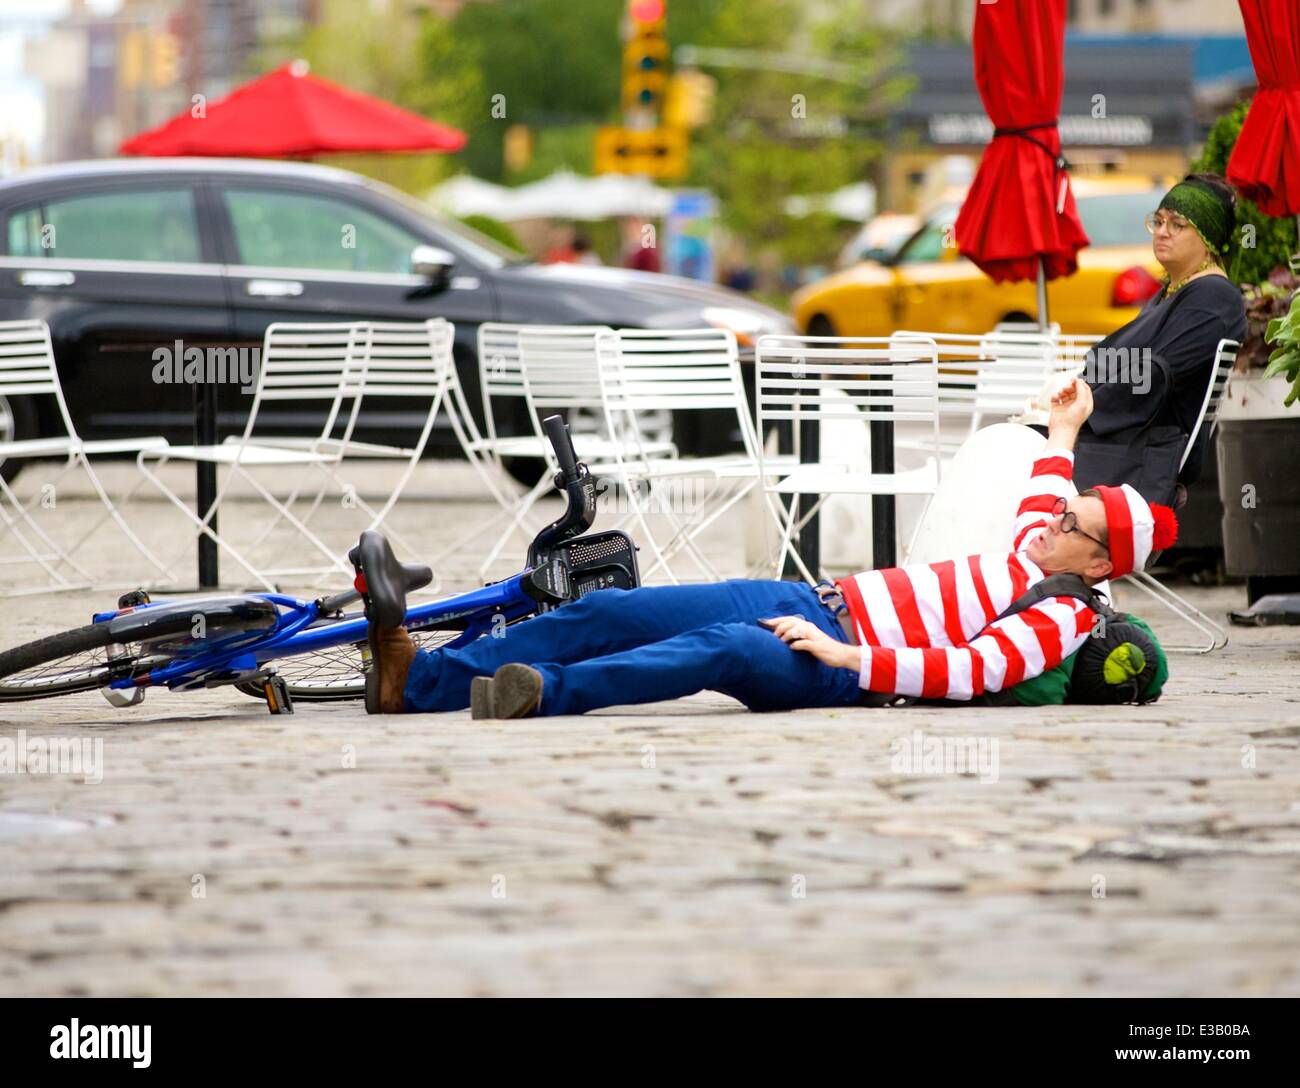 A man dressed as the character Waldo from the children's book series, 'Where's Waldo?' is spotted riding a Citi Bike in the Meatpacking District. With his hands full, Waldo eventually falls off his bicycle to the ground  Featuring: Waldo,Wally Where: New York City, NY, United States When: 14 Sep 2013.com Stock Photo